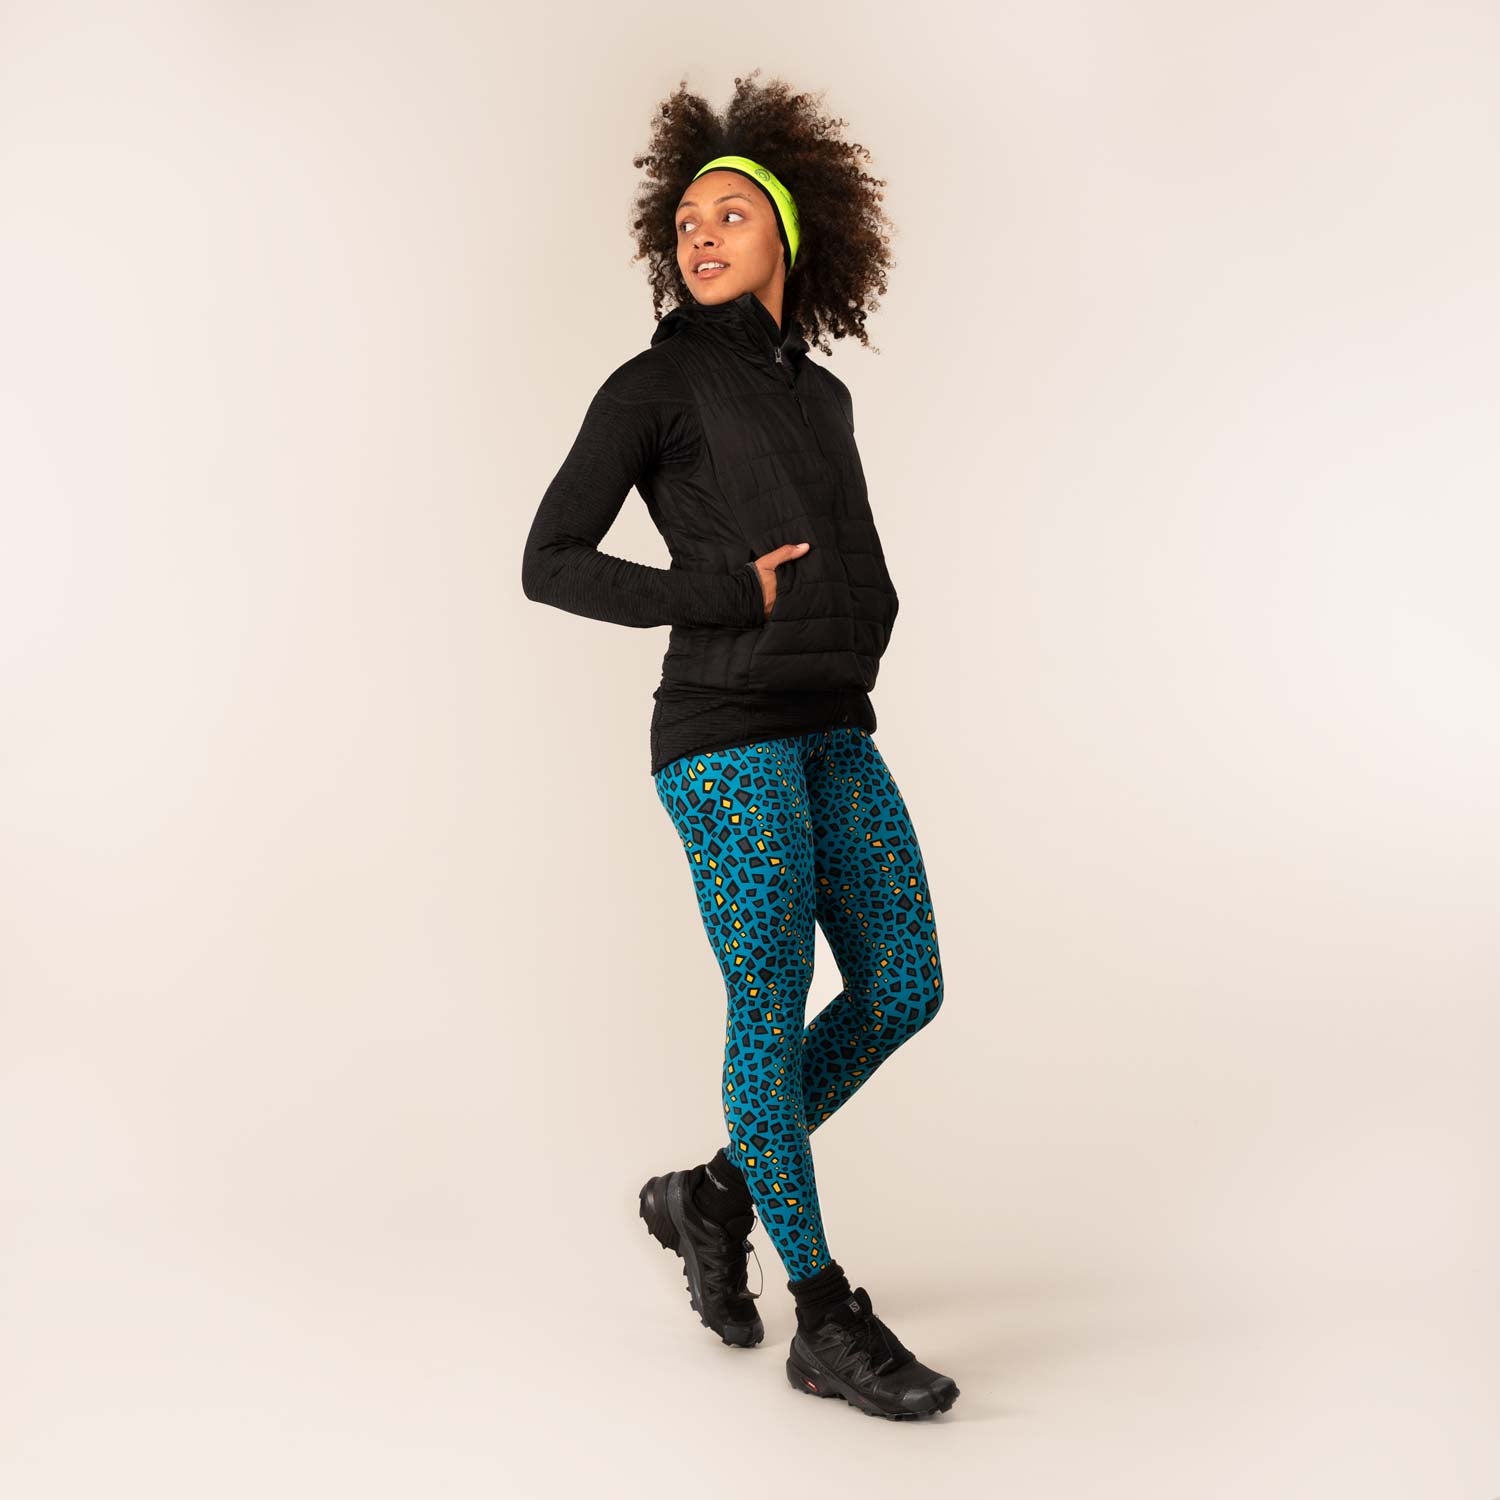 TITAN MINIMAL REPTILE | Printed Recycled Leggings | 3RD ROCK Clothing - Kendal is 5ft 7 with a 28" waist, 38" hips and wears a size 12 F